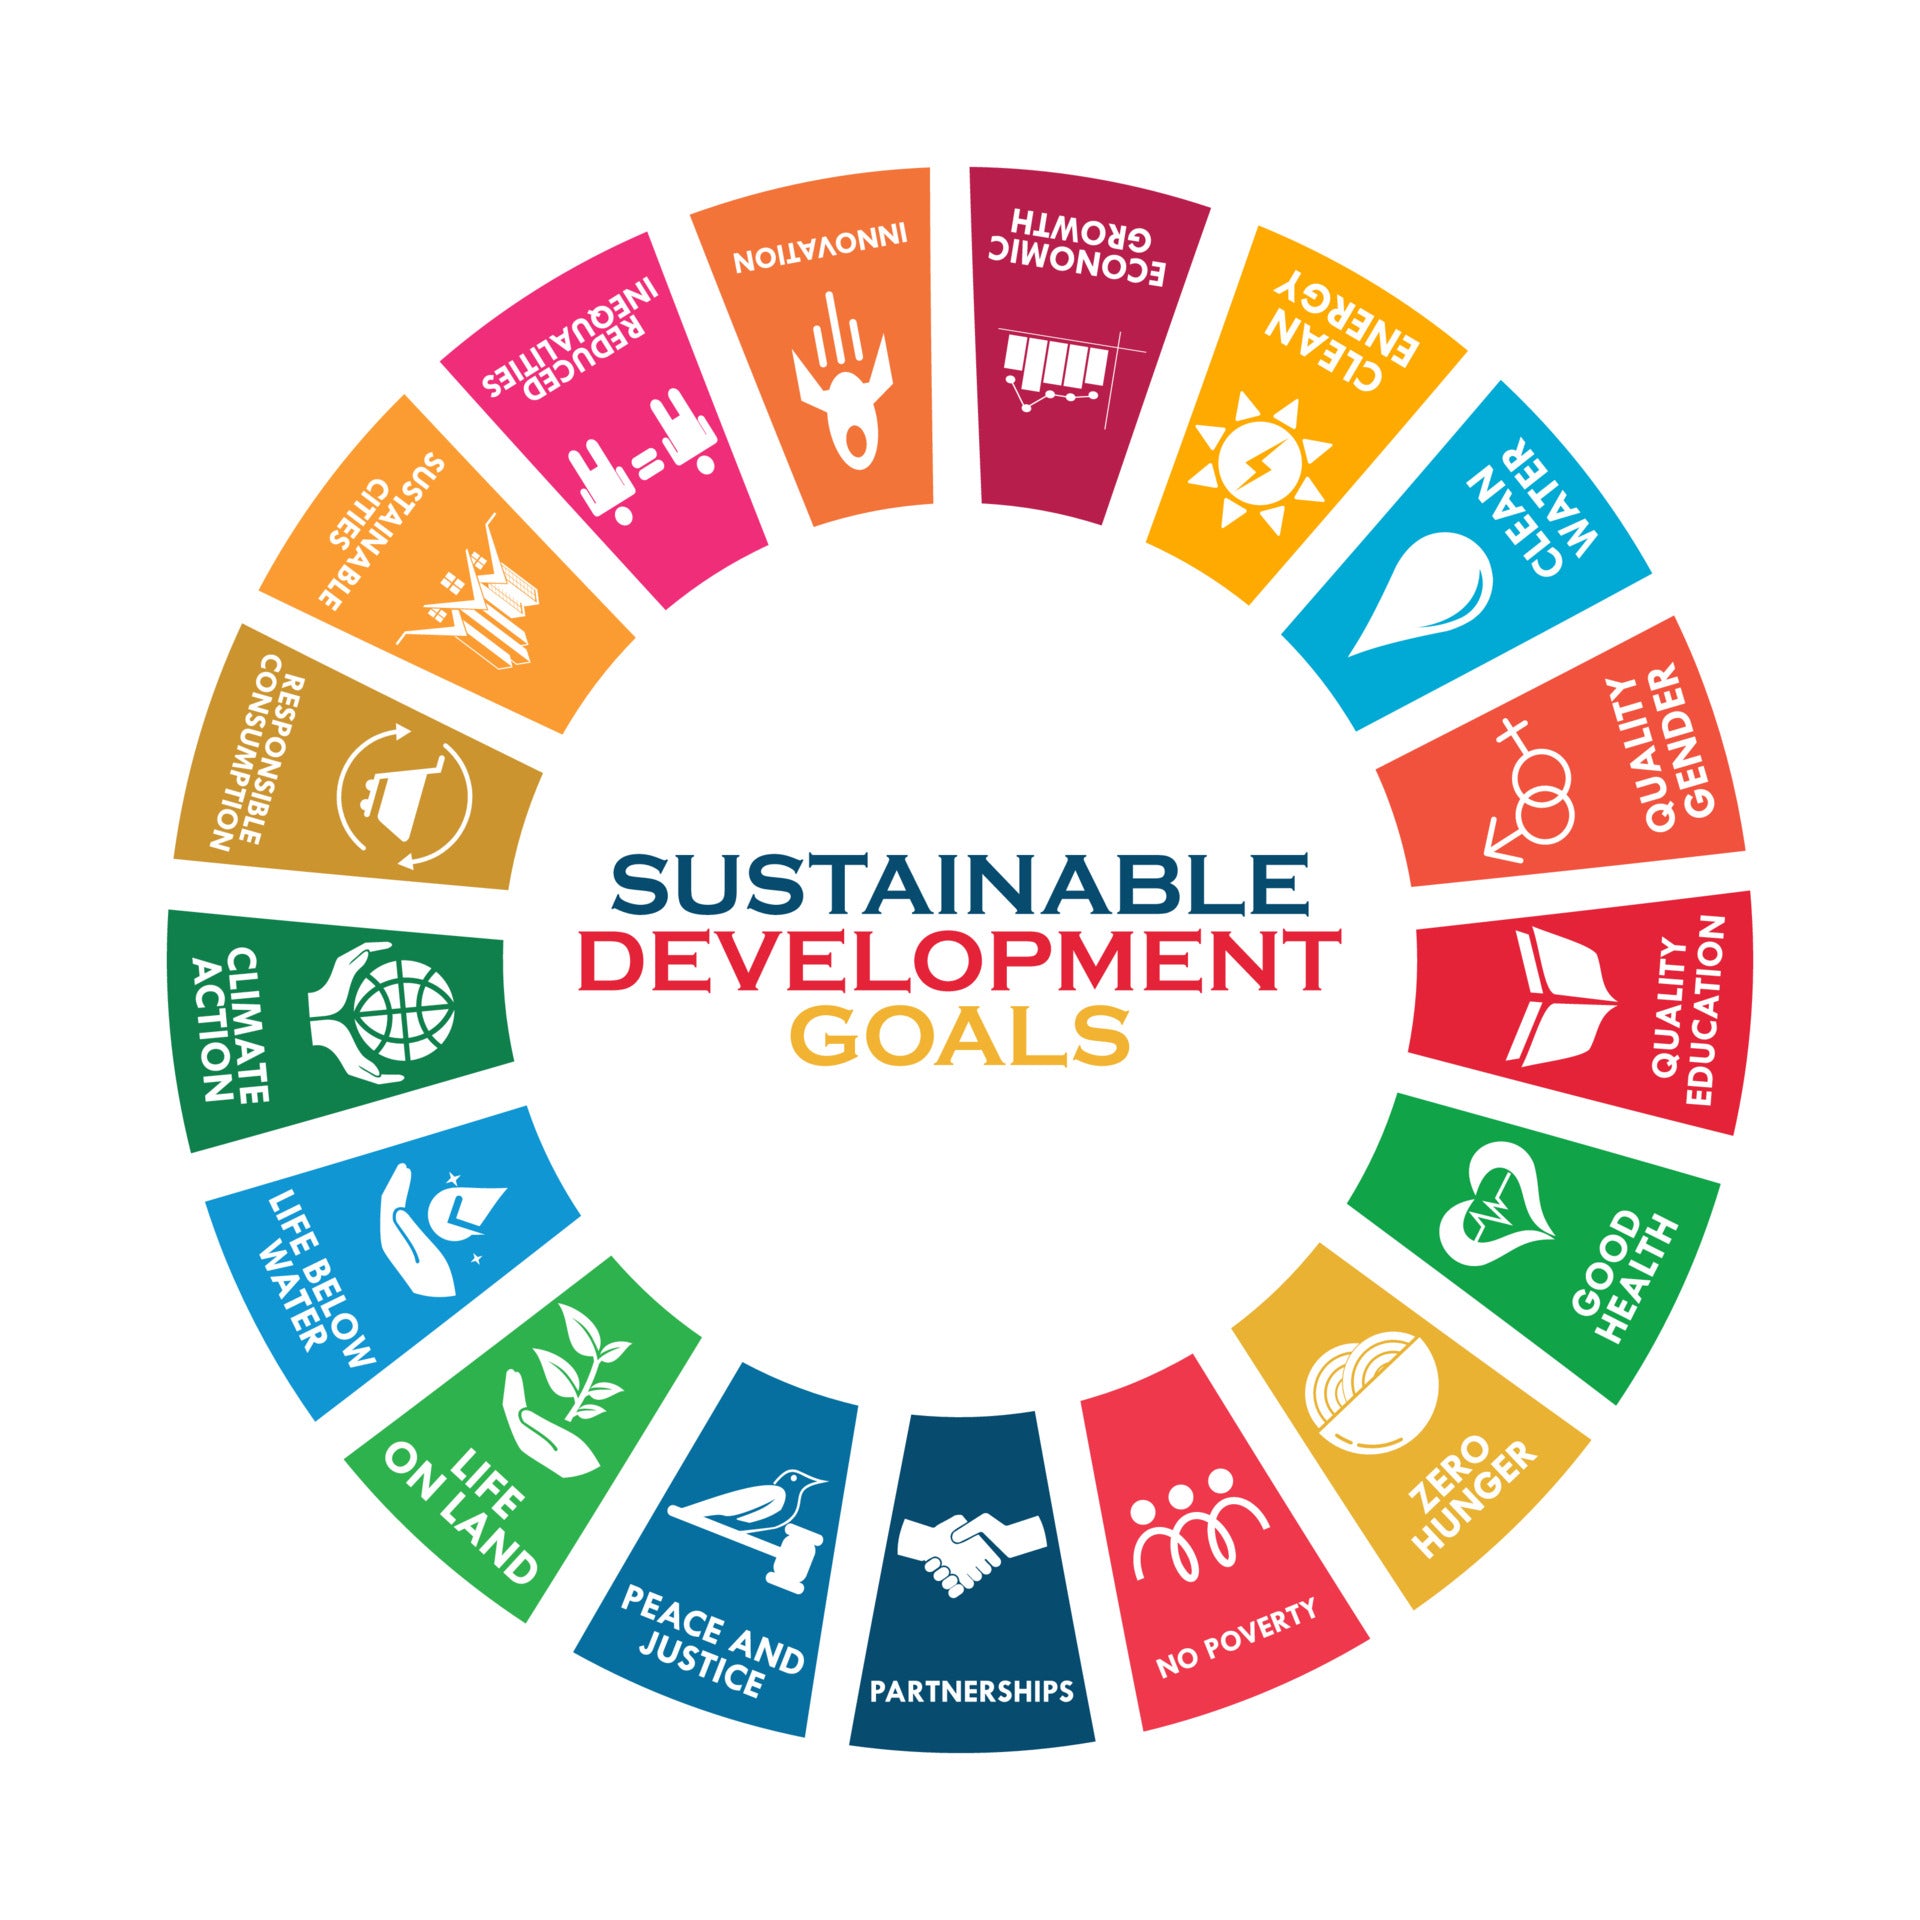 What are sustainable development goals?